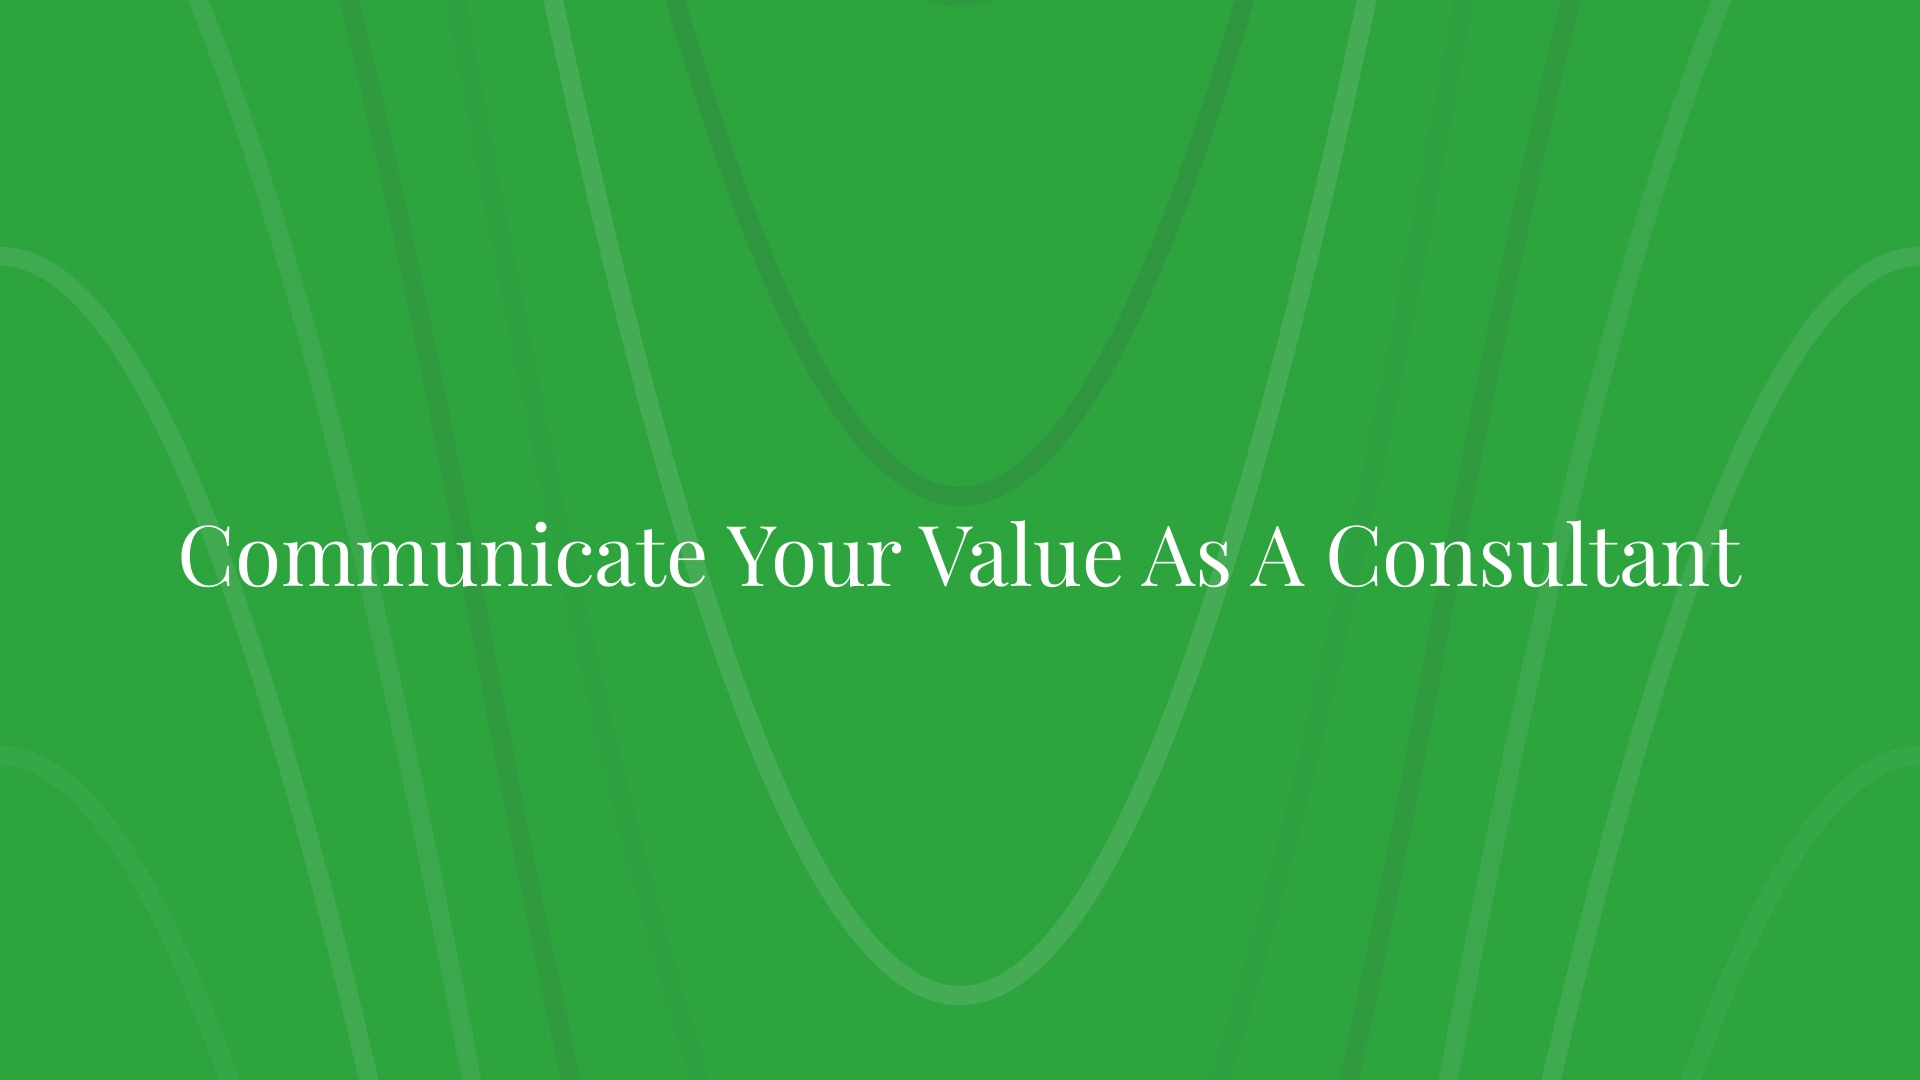 Communicate Your Value As A Consultant